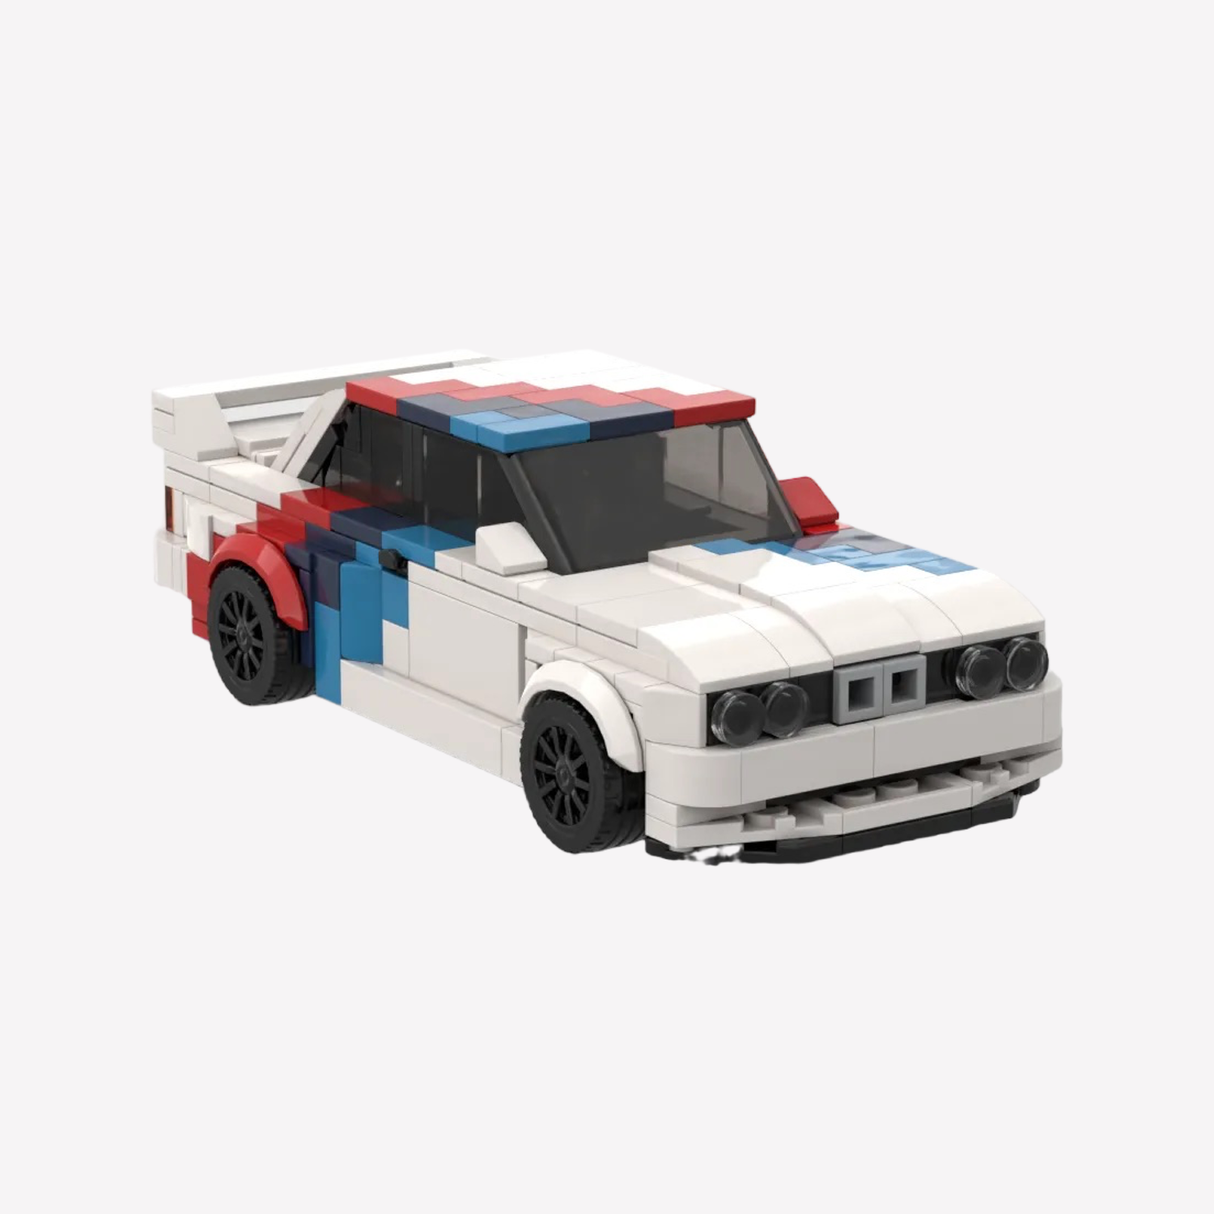 BMW E30 M3 Lego Style Block Kit Bavarian Legend Classic Toy Collectible 455 Pieces